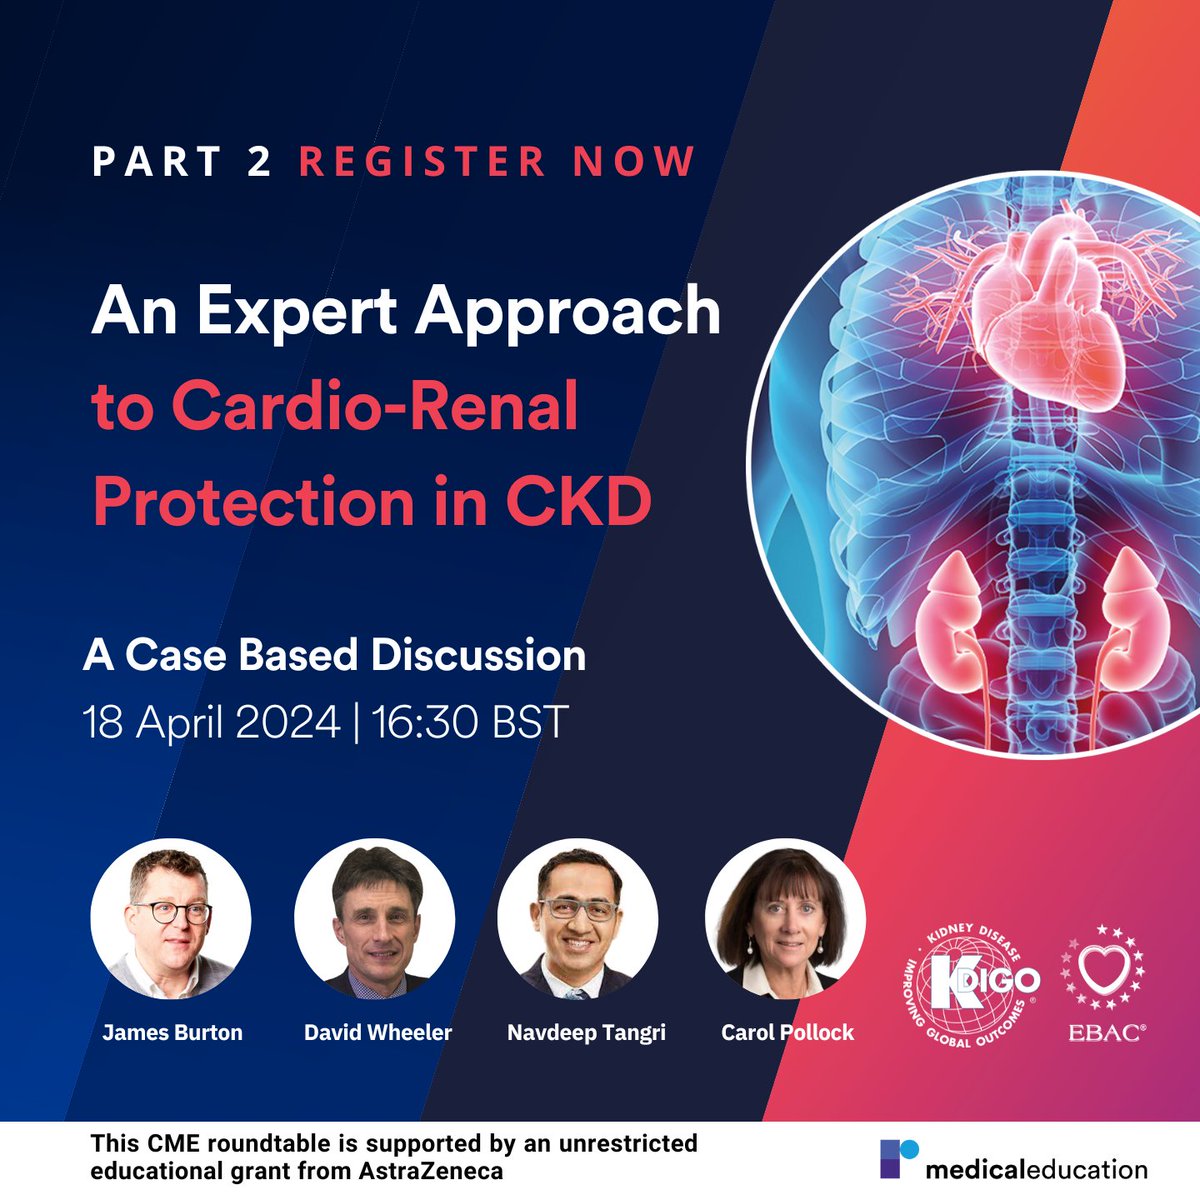 There is still time to register for An Expert Approach to Cardio-Renal Protection in CKD: A Case Based Discussion - Part Two on 18 April at 16:30 BST, 11:30 EDT, chaired by @drjamesburton. Register for free: radcliffe-group.swoogo.com/cardio-renal-p… This CME-accredited roundtable offers a